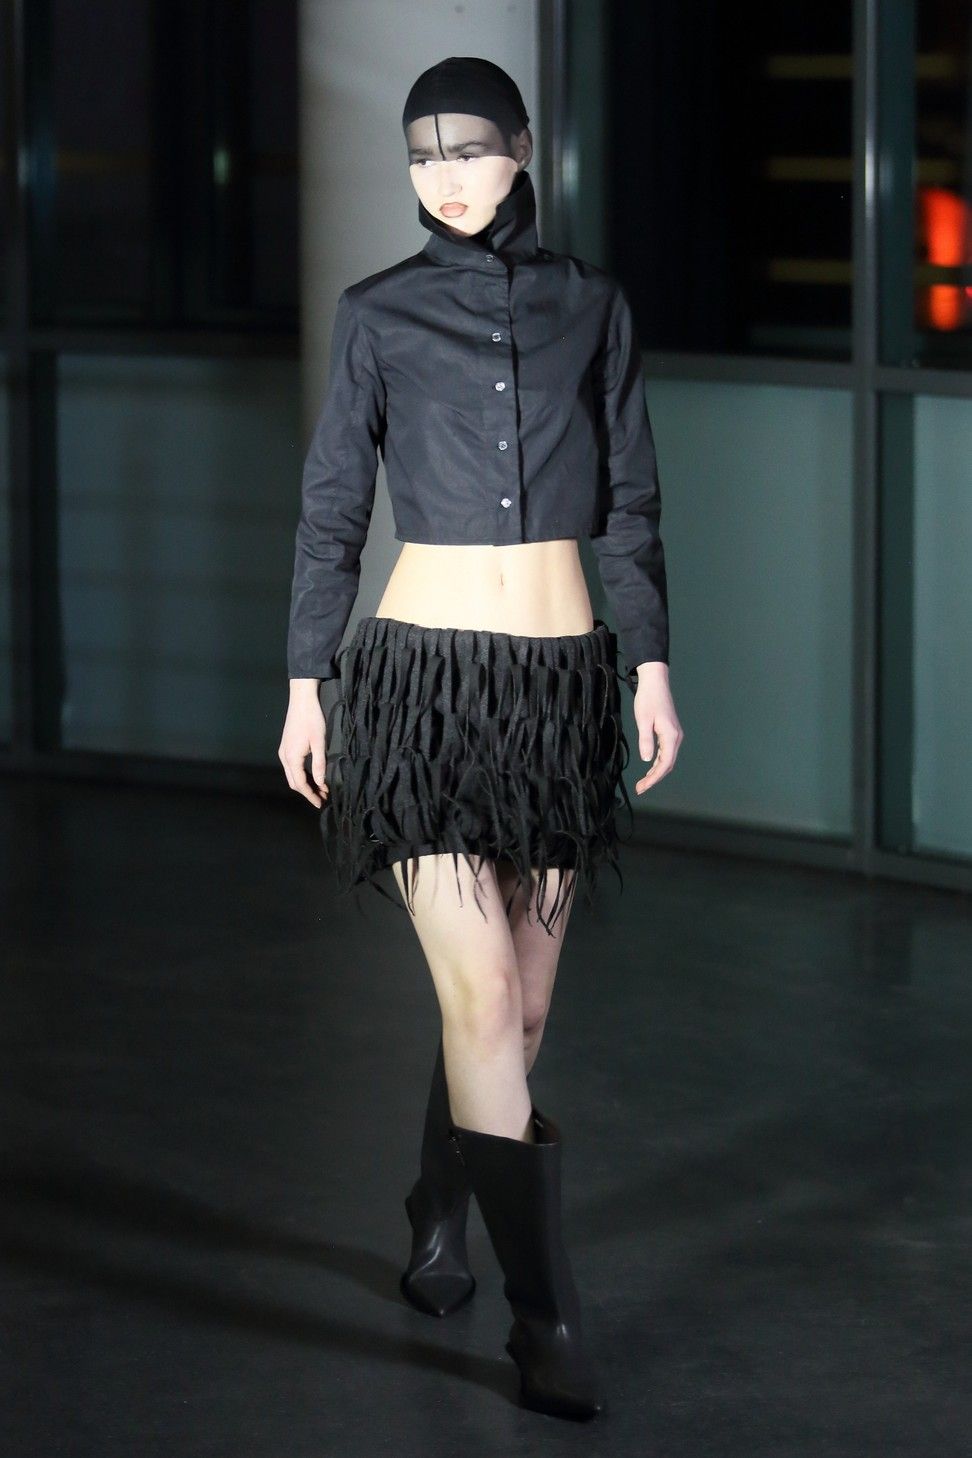 a person wearing a black jacket and black skirt